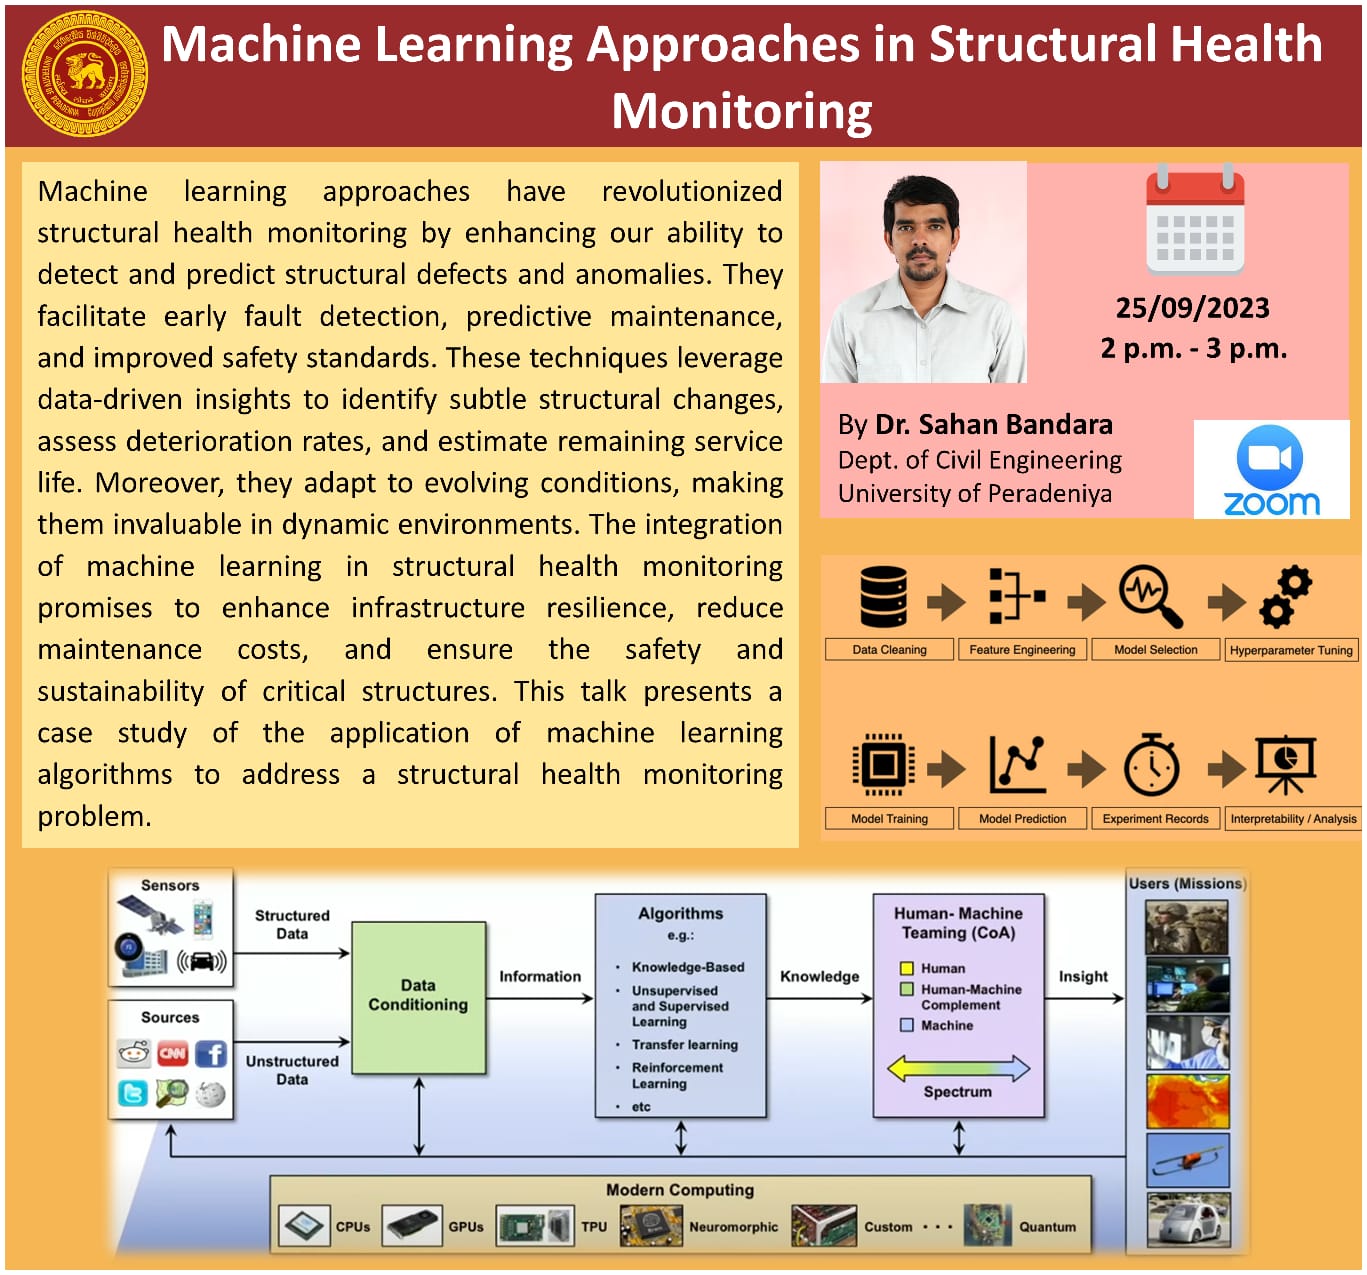 Machine Learning Approaches in Structural Health Monitoring